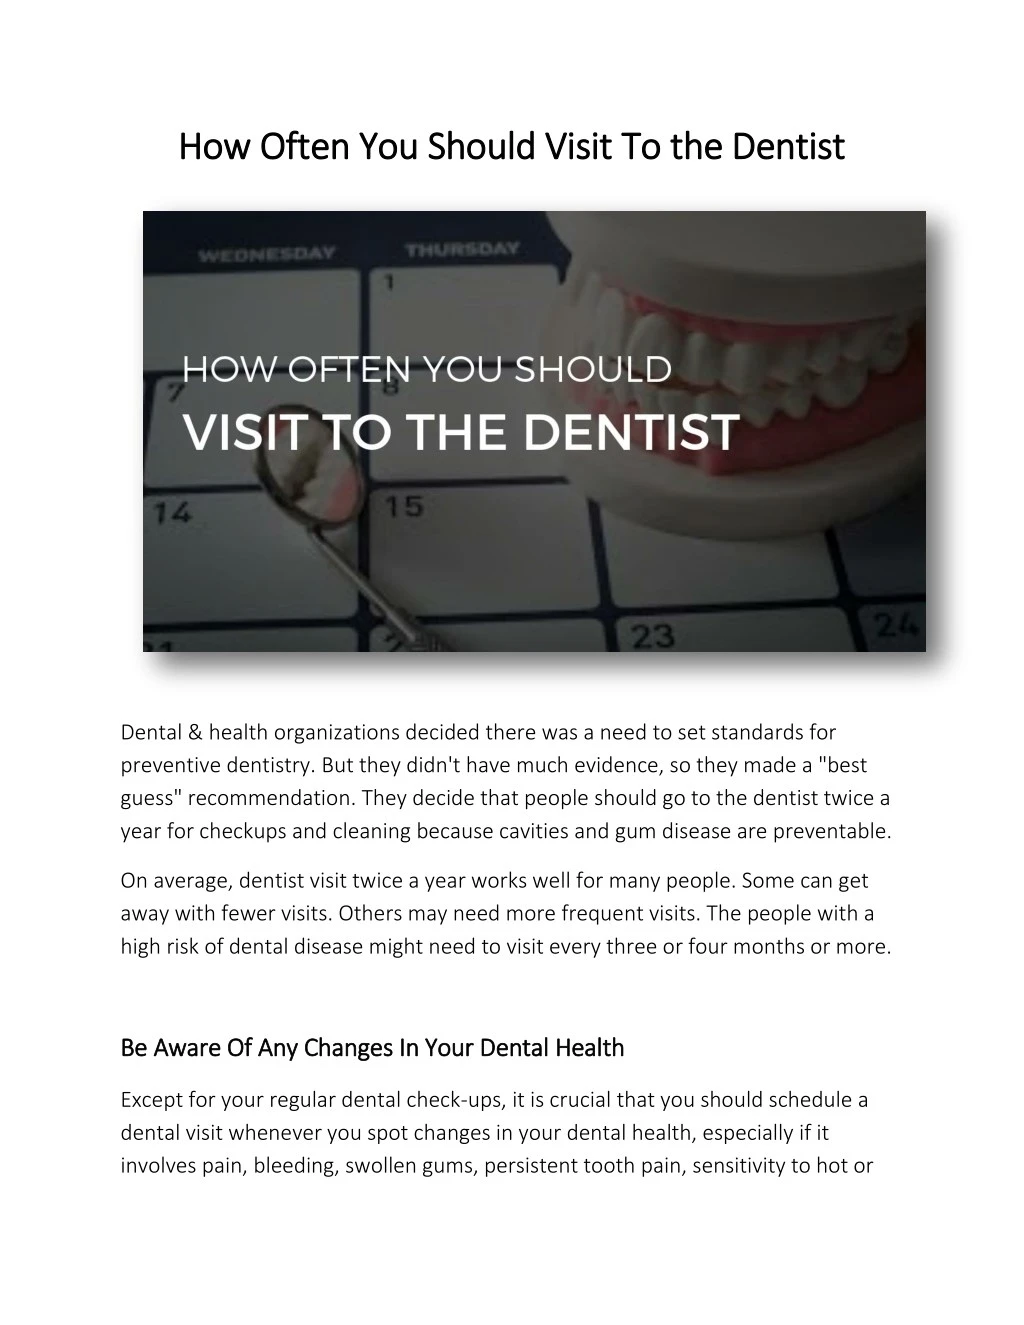 how often you should visit to the dentist